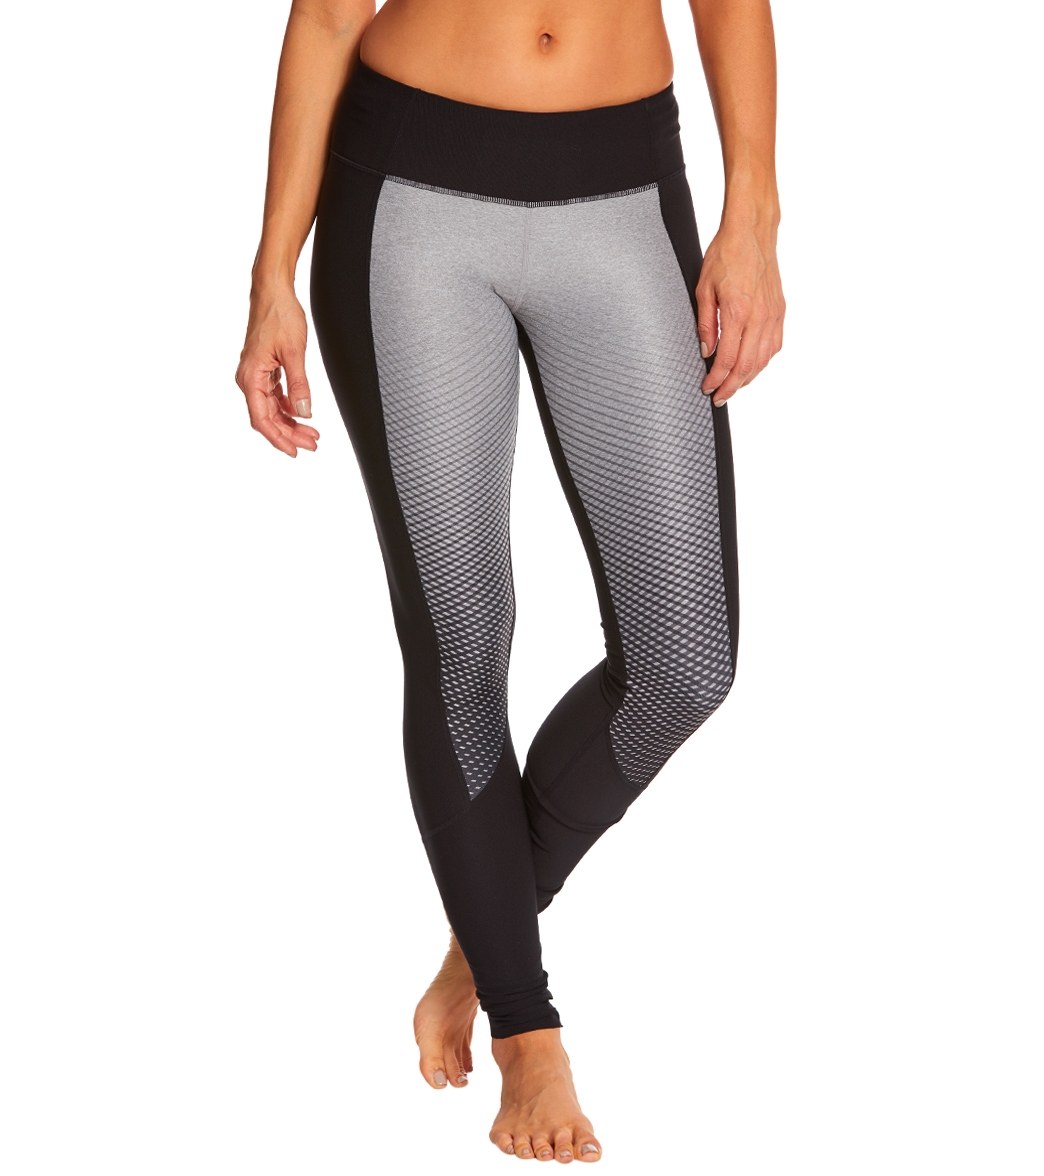 Mpg Women's Energize 2.0 Fitness Tight - Motion Heather Concrete Small Polyester/Spandex - Swimoutlet.com